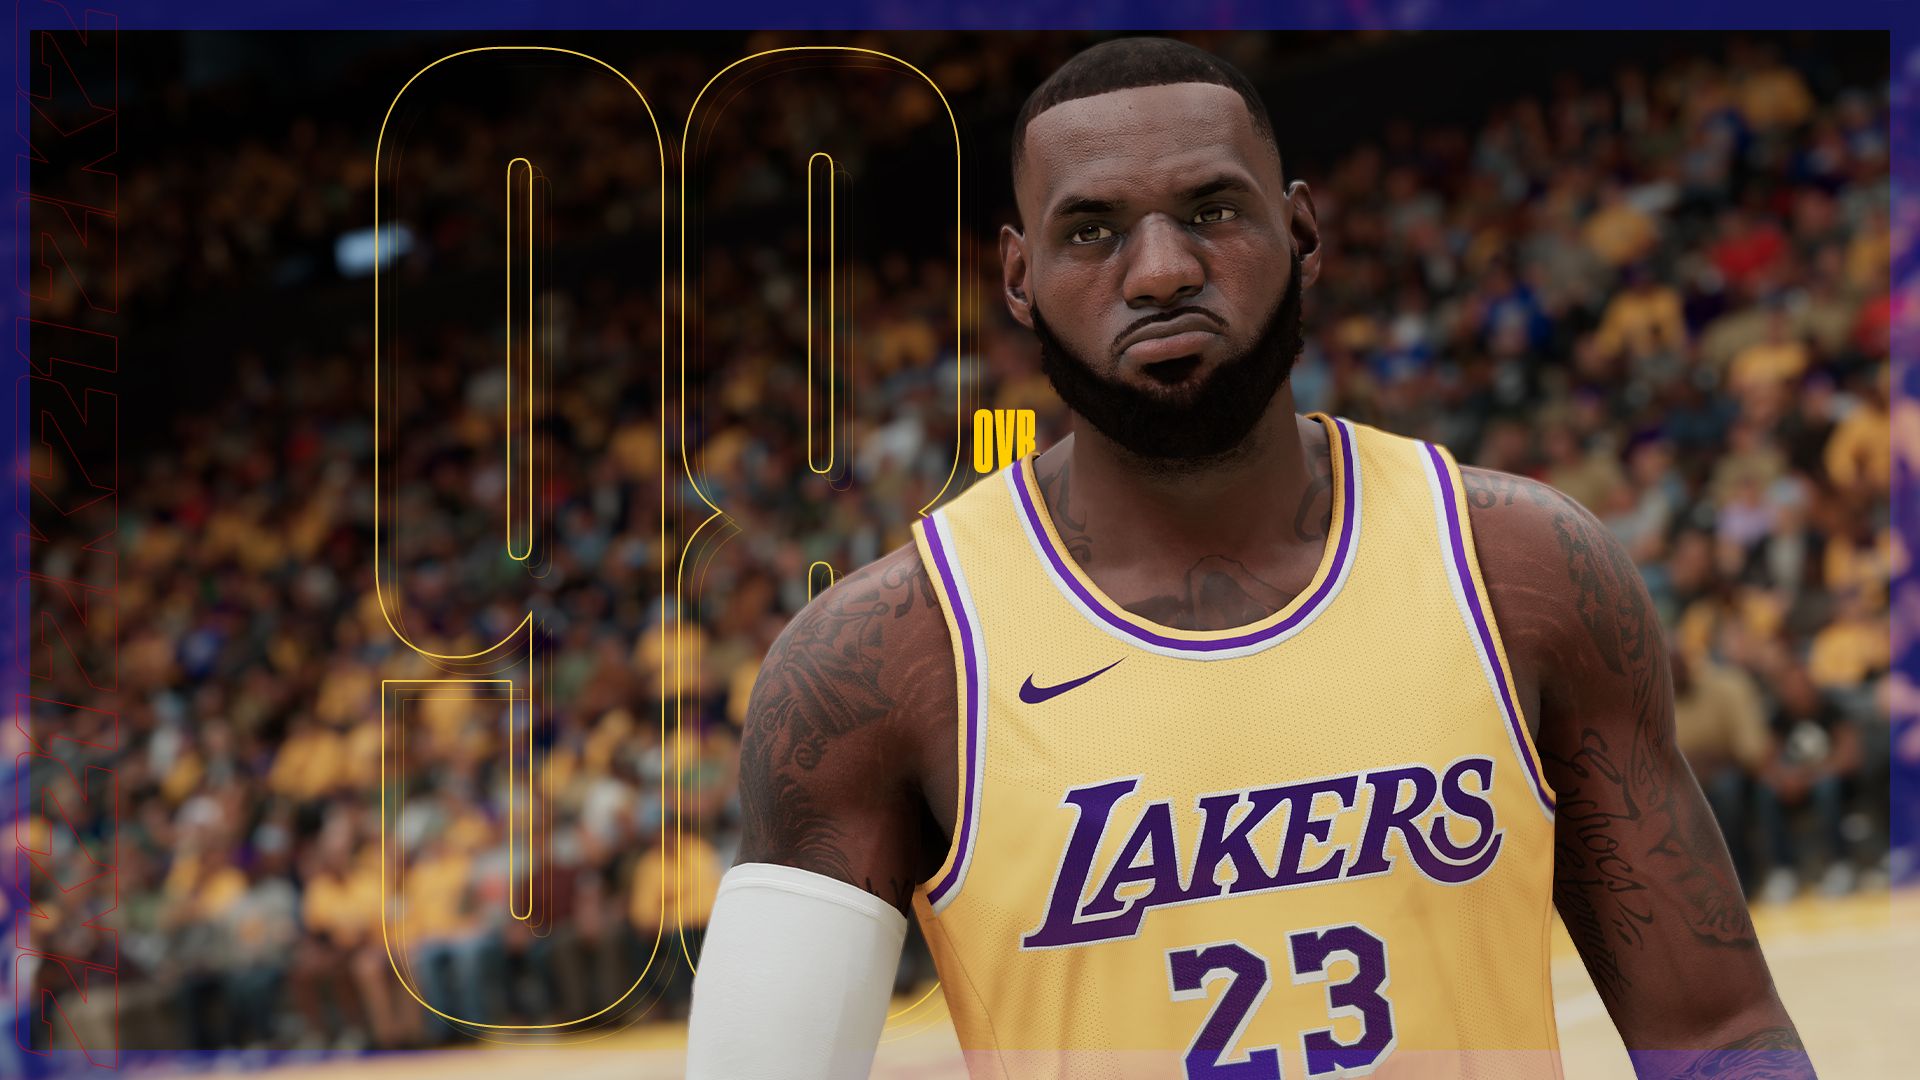 LeBron James is highest rated player in NBA 2K21